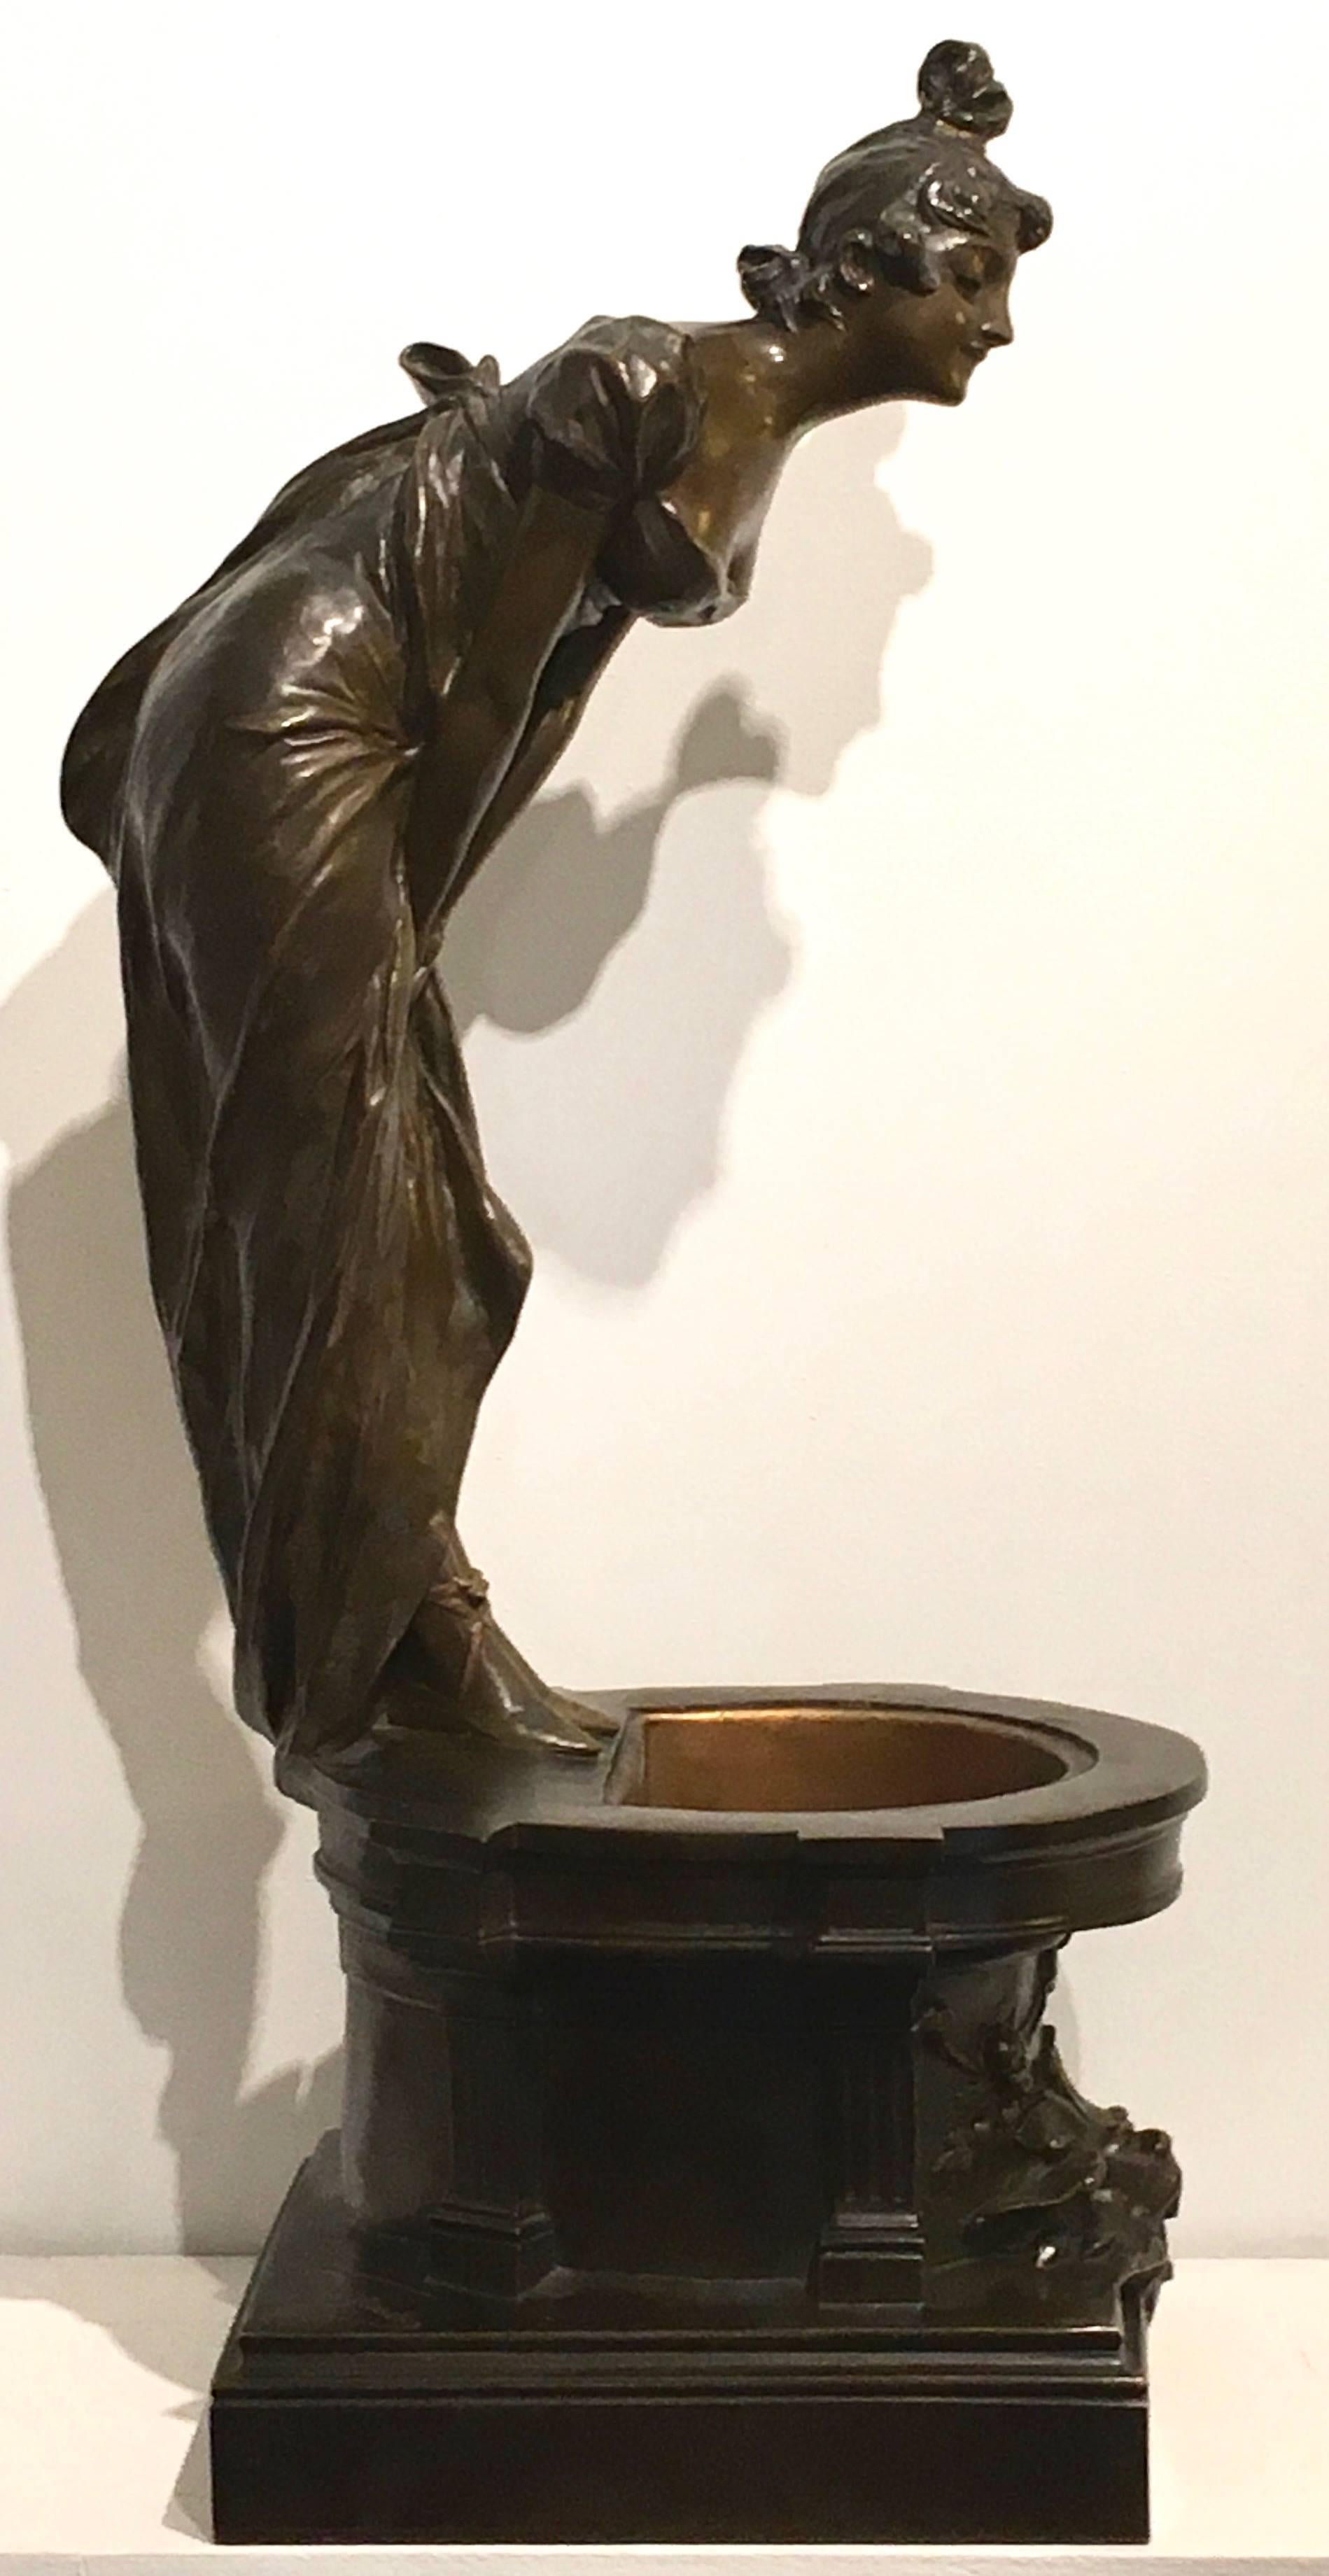 Georges Van der Straeten
(1856-1928)

Elegant lady by the bassin
Bronze sculpture and jardinière. 

Épreuve d'artiste,
Bronze sculpture in two patinas. 
Completed with copper Receptacle.

Signed G VAN STRAETEN on the back of the base,